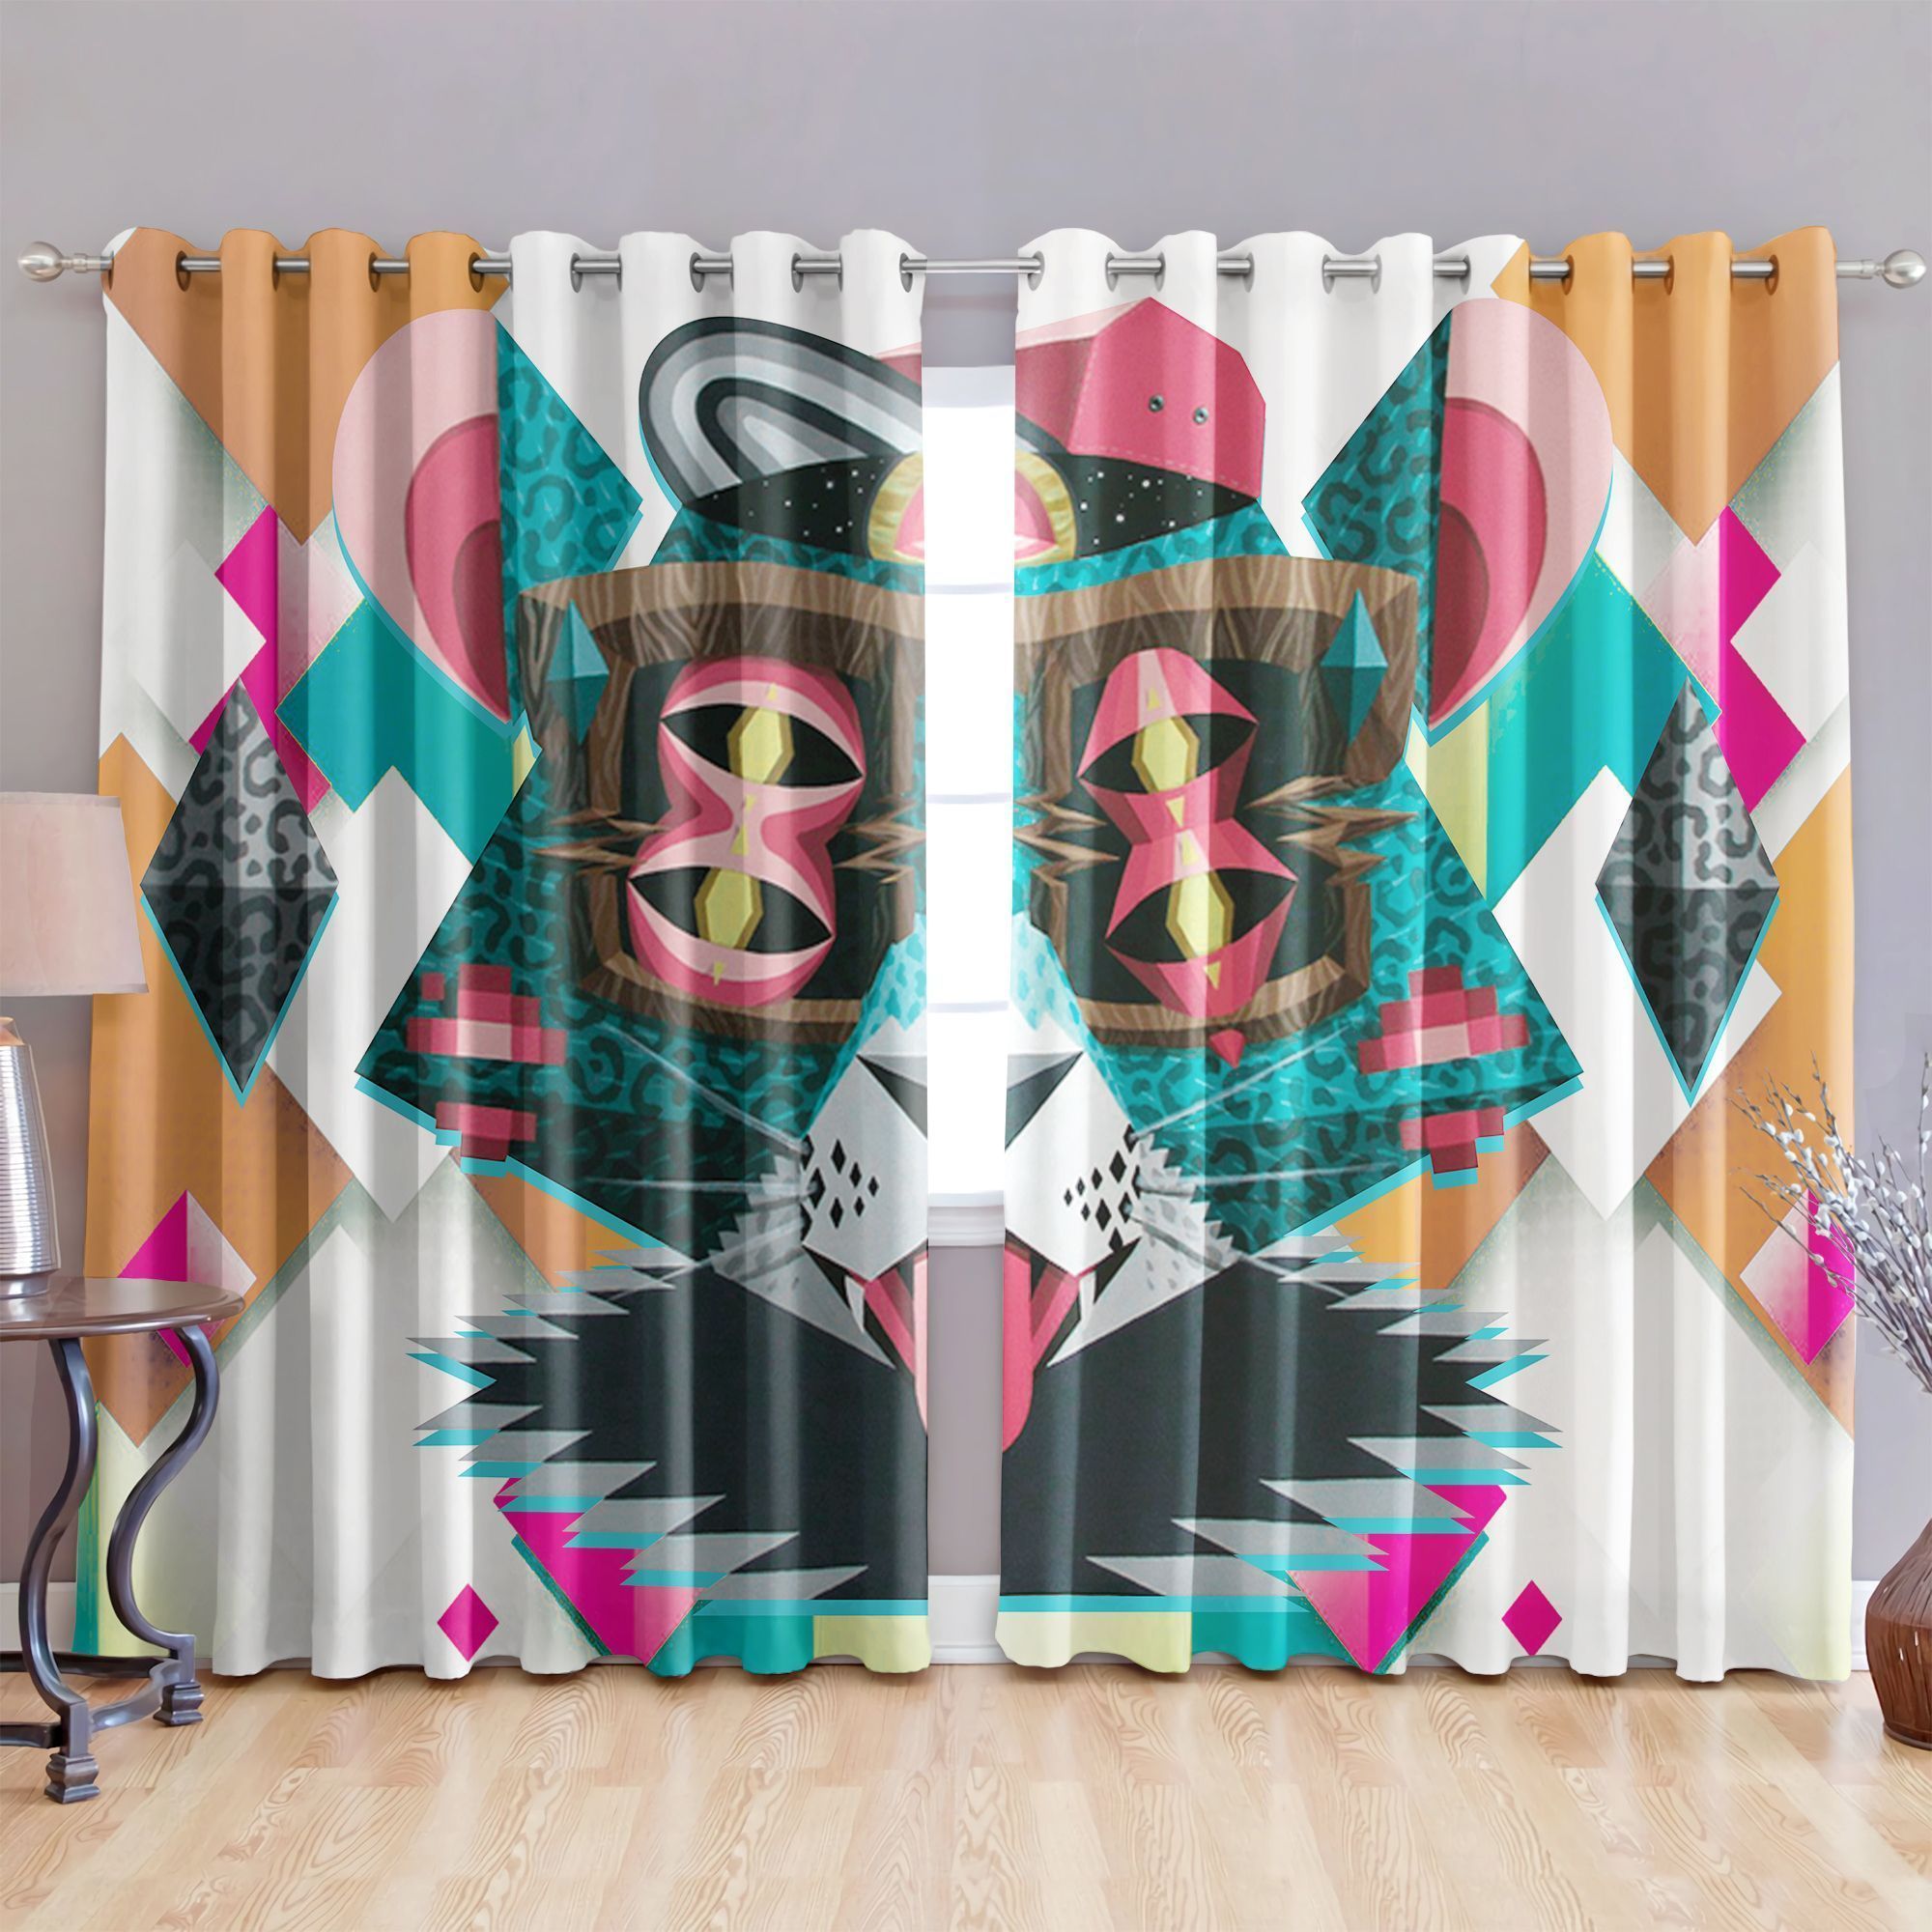 Appealing Cat Printed Window Curtains Home Decor